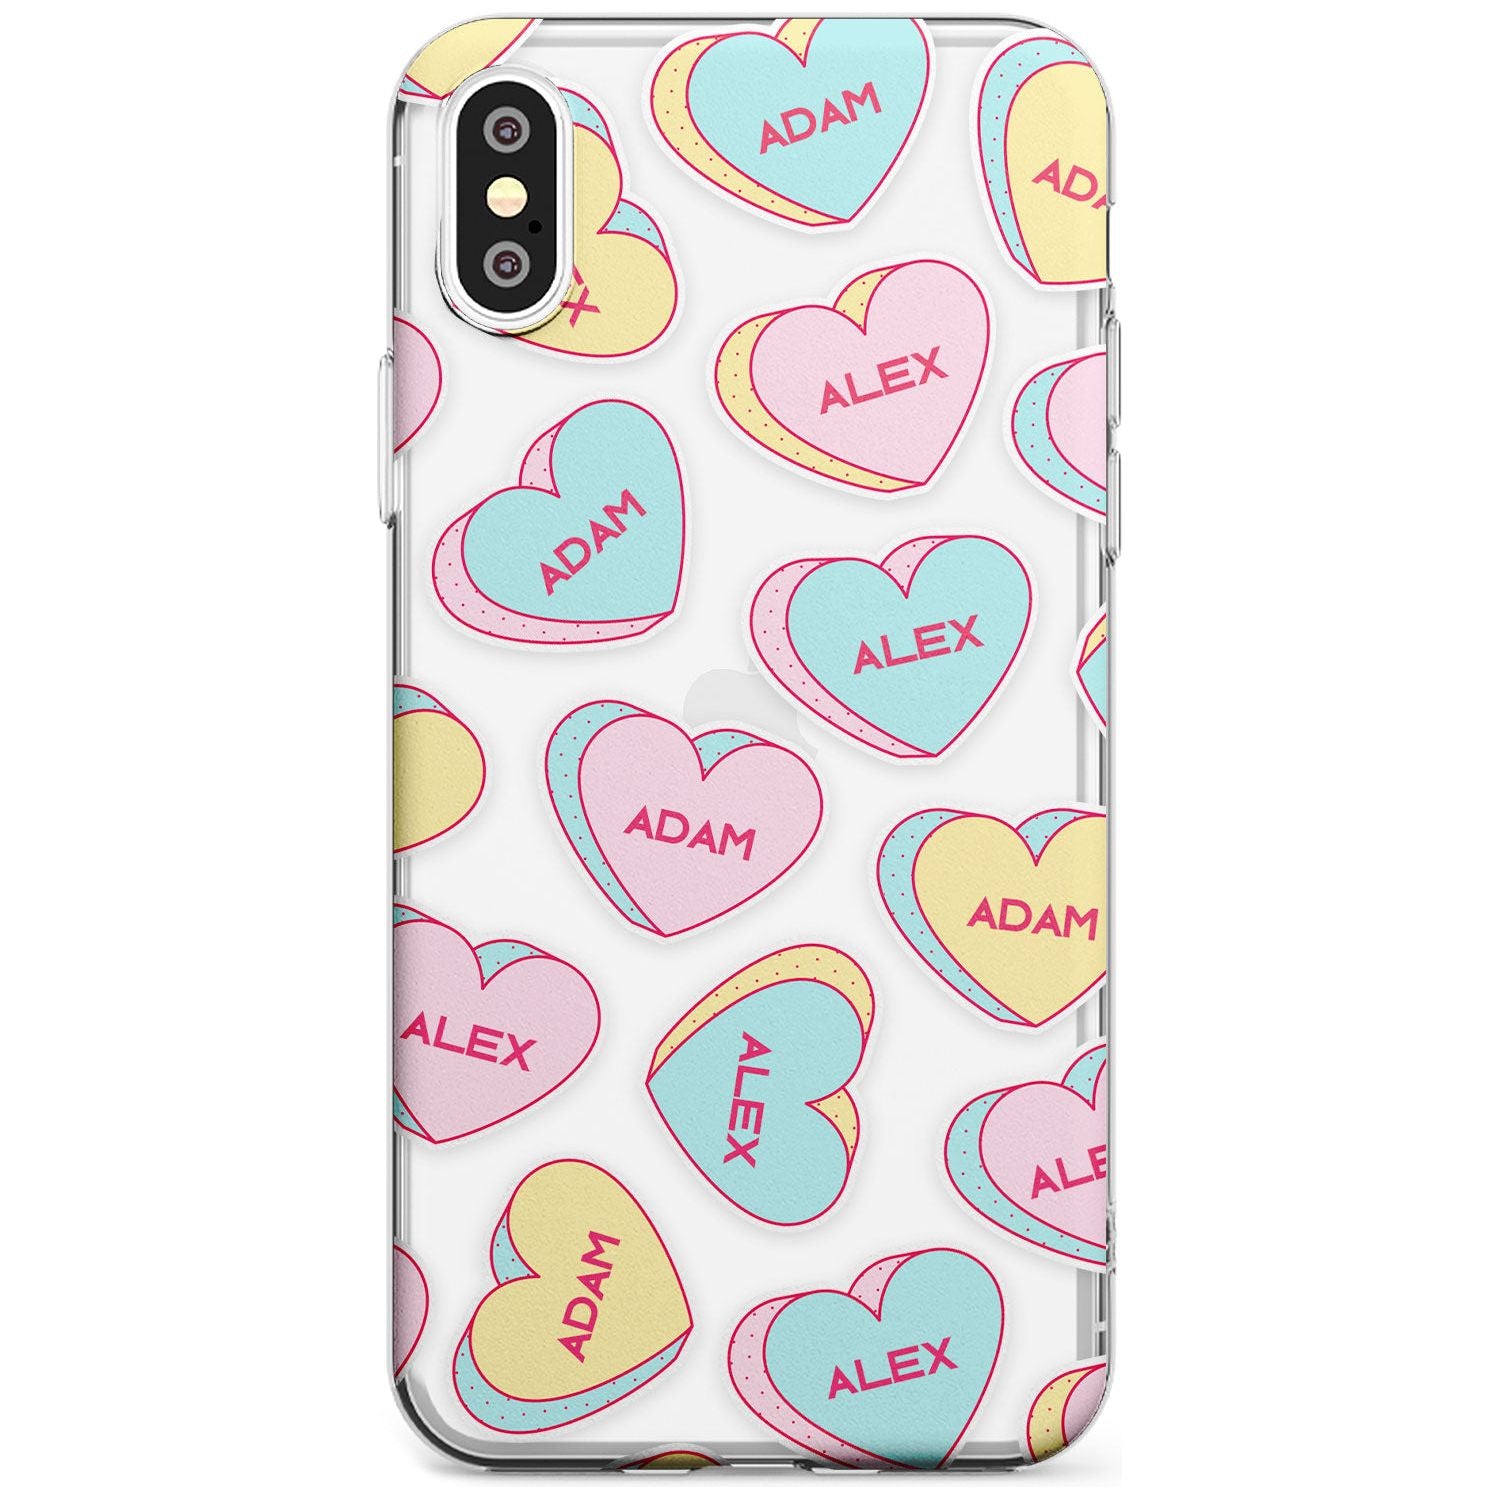 Custom Text Love Hearts Black Impact Phone Case for iPhone X XS Max XR